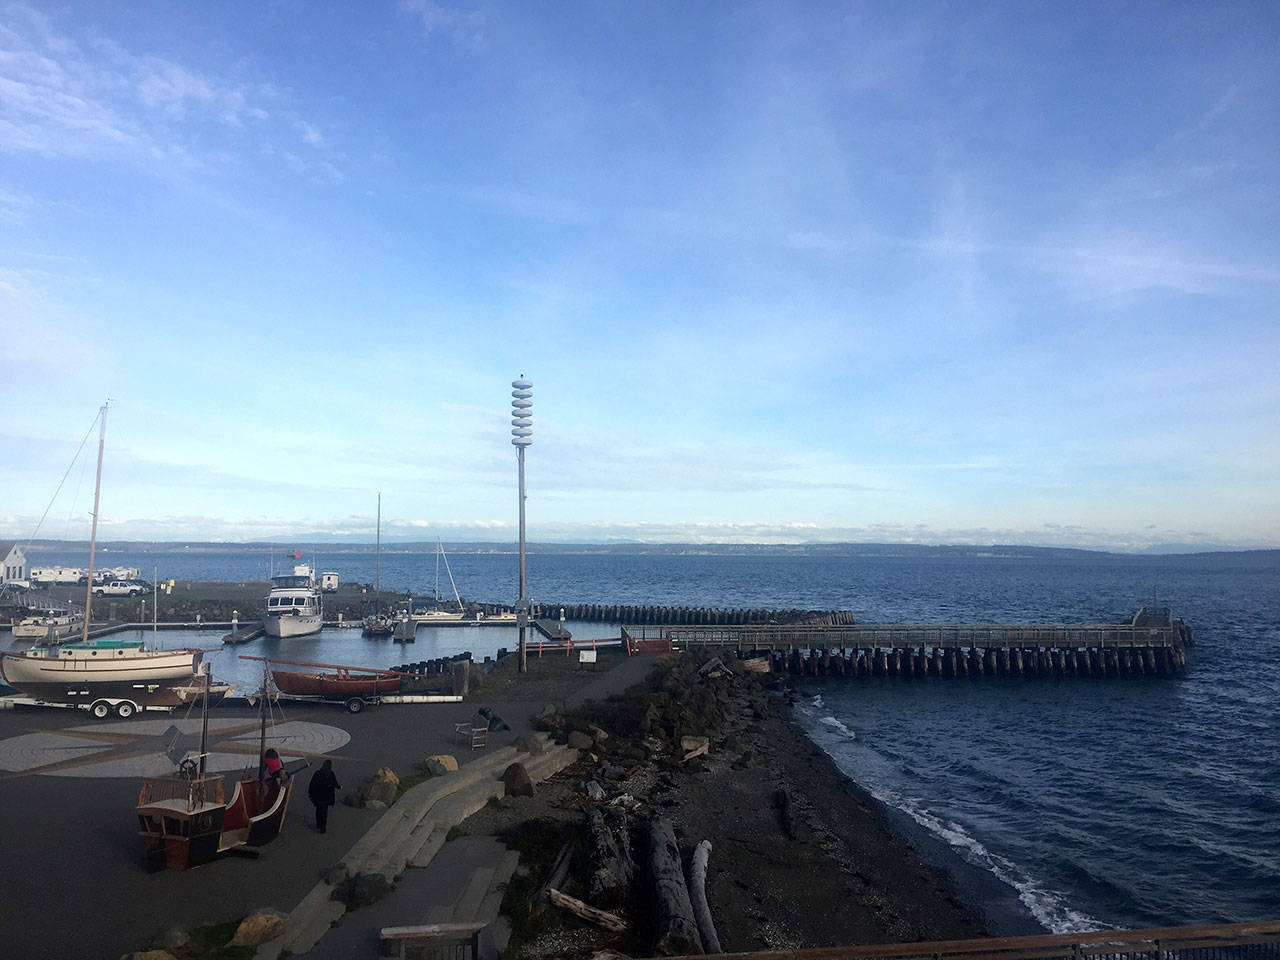 The Port of Port Townsend is extending its online open house until Nov. 30 in order to gather more public comment to create a plan for development in Point Hudson. (Cydney McFarland/Peninsula Daily News)